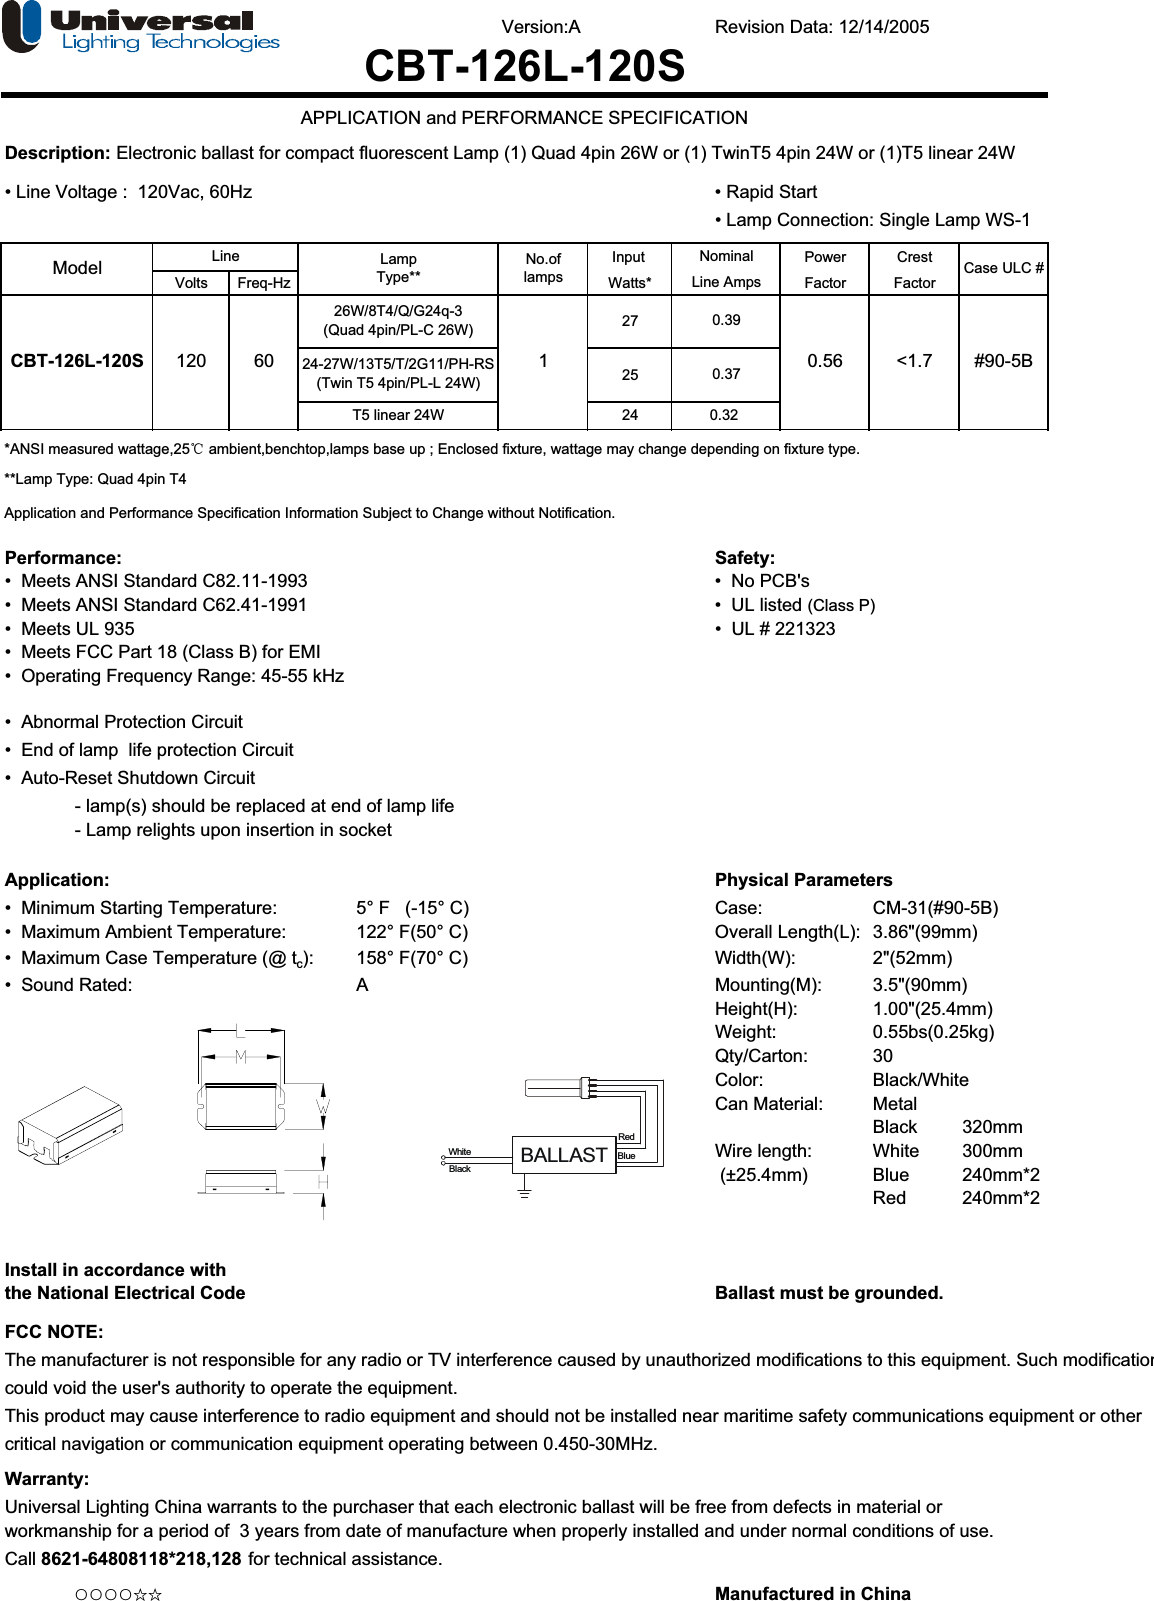 Version:A Revision Data: 12/14/2005Description: Electronic ballast for compact fluorescent Lamp (1) Quad 4pin 26W or (1) TwinT5 4pin 24W or (1)T5 linear 24W• Line Voltage :  120Vac, 60Hz • Rapid Start• Lamp Connection: Single Lamp WS-1 Input Power CrestVolts Freq-Hz Watts* Factor Factor272524*ANSI measured wattage,25ć ambient,benchtop,lamps base up ; Enclosed fixture, wattage may change depending on fixture type.**Lamp Type: Quad 4pin T4Application and Performance Specification Information Subject to Change without Notification.Performance: Safety:•  Meets ANSI Standard C82.11-1993 •  No PCB&apos;s•  Meets ANSI Standard C62.41-1991 •  UL listed (Class P)•  Meets UL 935   •  UL # 221323•  Meets FCC Part 18 (Class B) for EMI•  Operating Frequency Range: 45-55 kHz•  Abnormal Protection Circuit •  End of lamp  life protection Circuit •  Auto-Reset Shutdown Circuit - lamp(s) should be replaced at end of lamp life- Lamp relights upon insertion in socketApplication: Physical Parameters•  Minimum Starting Temperature:  5° F   (-15° C) Case:  CM-31(#90-5B)•  Maximum Ambient Temperature: 122° F(50° C) Overall Length(L): 3.86&quot;(99mm)•  Maximum Case Temperature (@ tc): 158° F(70° C) Width(W): 2&quot;(52mm)•  Sound Rated: A Mounting(M): 3.5&quot;(90mm)Height(H): 1.00&quot;(25.4mm)Weight: 0.55bs(0.25kg)Qty/Carton: 30Color: Black/WhiteCan Material: MetalBlack 320mmWire length: White 300mm (±25.4mm) Blue   240mm*2Red    240mm*2Install in accordance withthe National Electrical Code Ballast must be grounded.FCC NOTE:The manufacturer is not responsible for any radio or TV interference caused by unauthorized modifications to this equipment. Such modificationcould void the user&apos;s authority to operate the equipment.This product may cause interference to radio equipment and should not be installed near maritime safety communications equipment or othercritical navigation or communication equipment operating between 0.450-30MHz.Warranty:Universal Lighting China warrants to the purchaser that each electronic ballast will be free from defects in material orworkmanship for a period of  3 years from date of manufacture when properly installed and under normal conditions of use. Call 8621-64808118*218,128 for technical assistance.ƻƻƻƻƿƿ Manufactured in China#90-5B120 60CBT-126L-120S 1 0.56 &lt;1.70.32CBT-126L-120SAPPLICATION and PERFORMANCE SPECIFICATIONLine Case ULC #No.oflampsModel NominalLine AmpsLampType**T5 linear 24W26W/8T4/Q/G24q-3(Quad 4pin/PL-C 26W)24-27W/13T5/T/2G11/PH-RS(Twin T5 4pin/PL-L 24W)0.390.37BALLASTRedBlueWhiteBlack